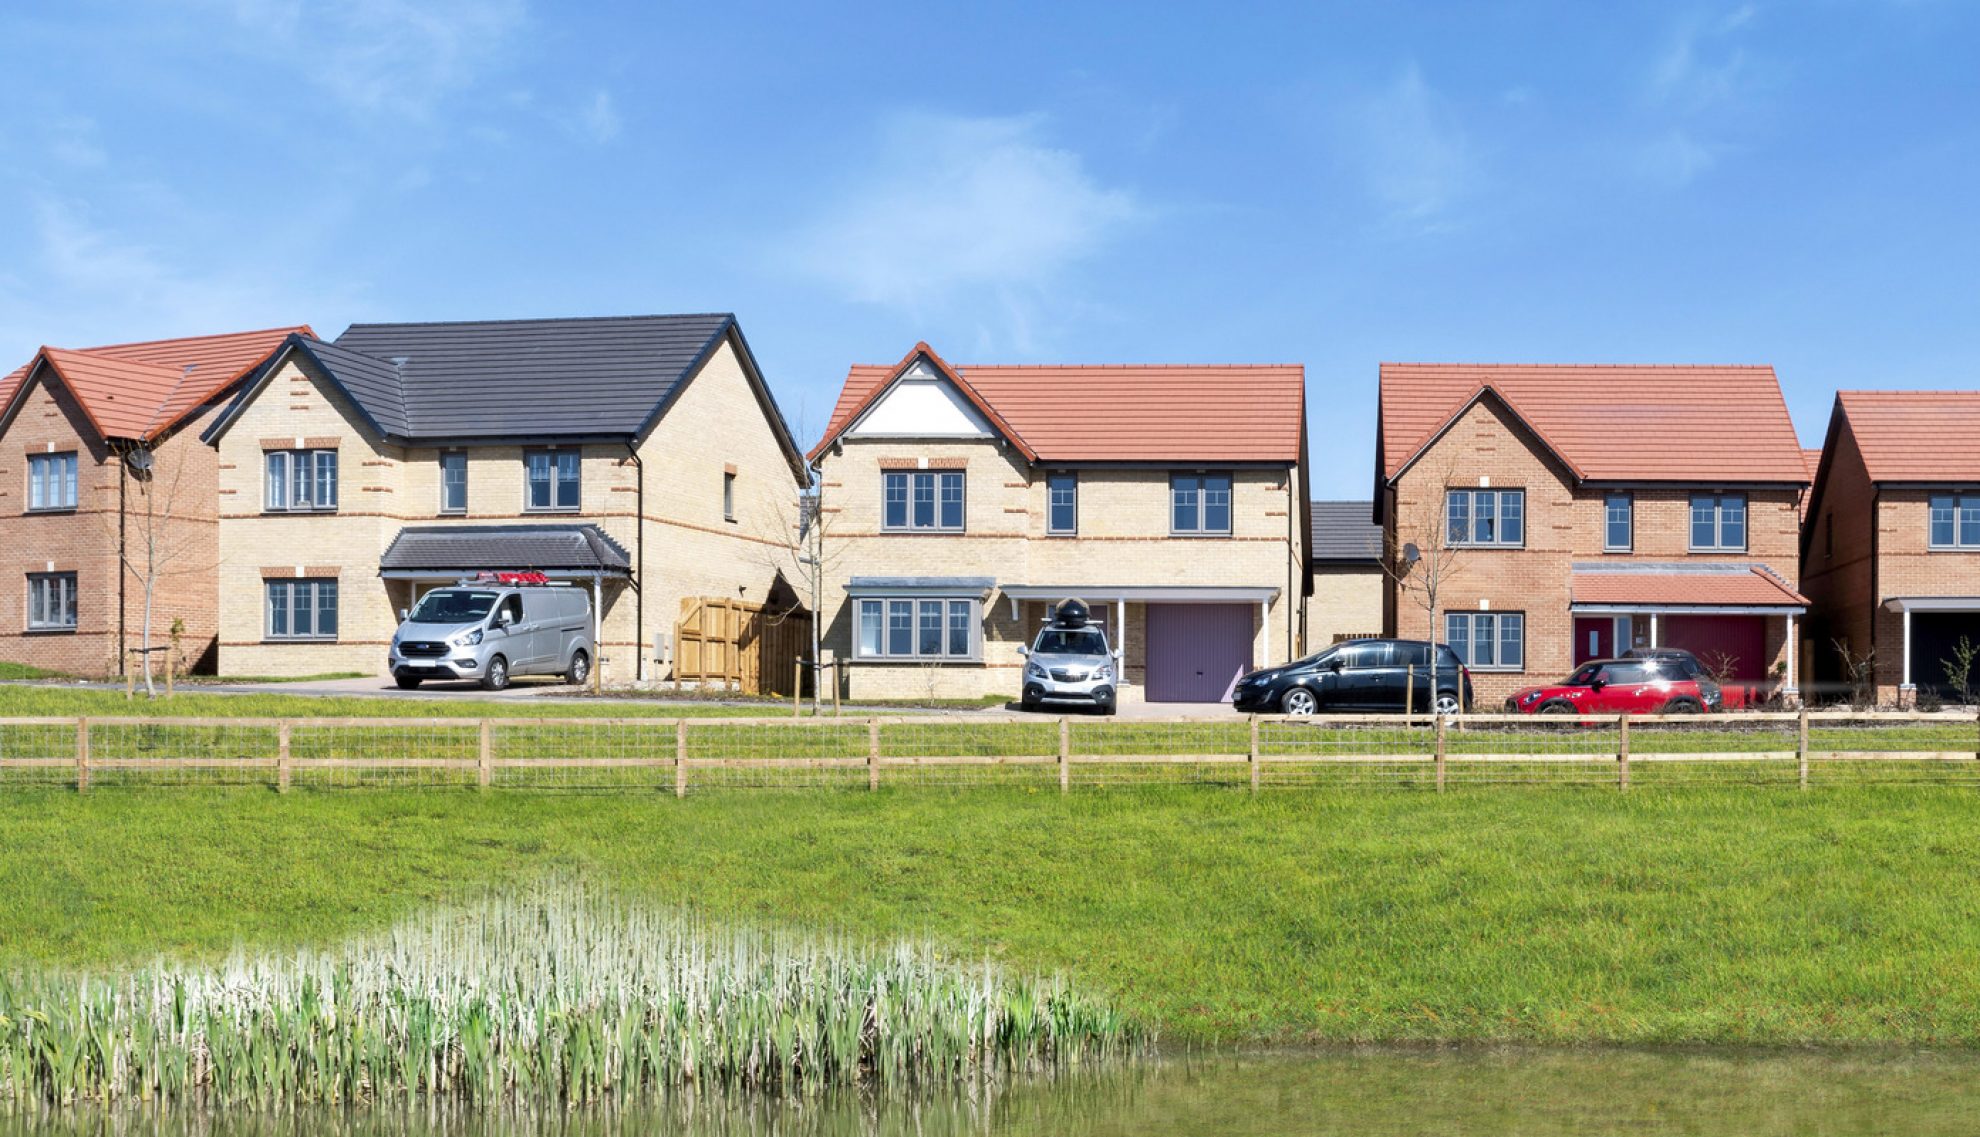 Peerfields – the highest-rated new homes development in North East England